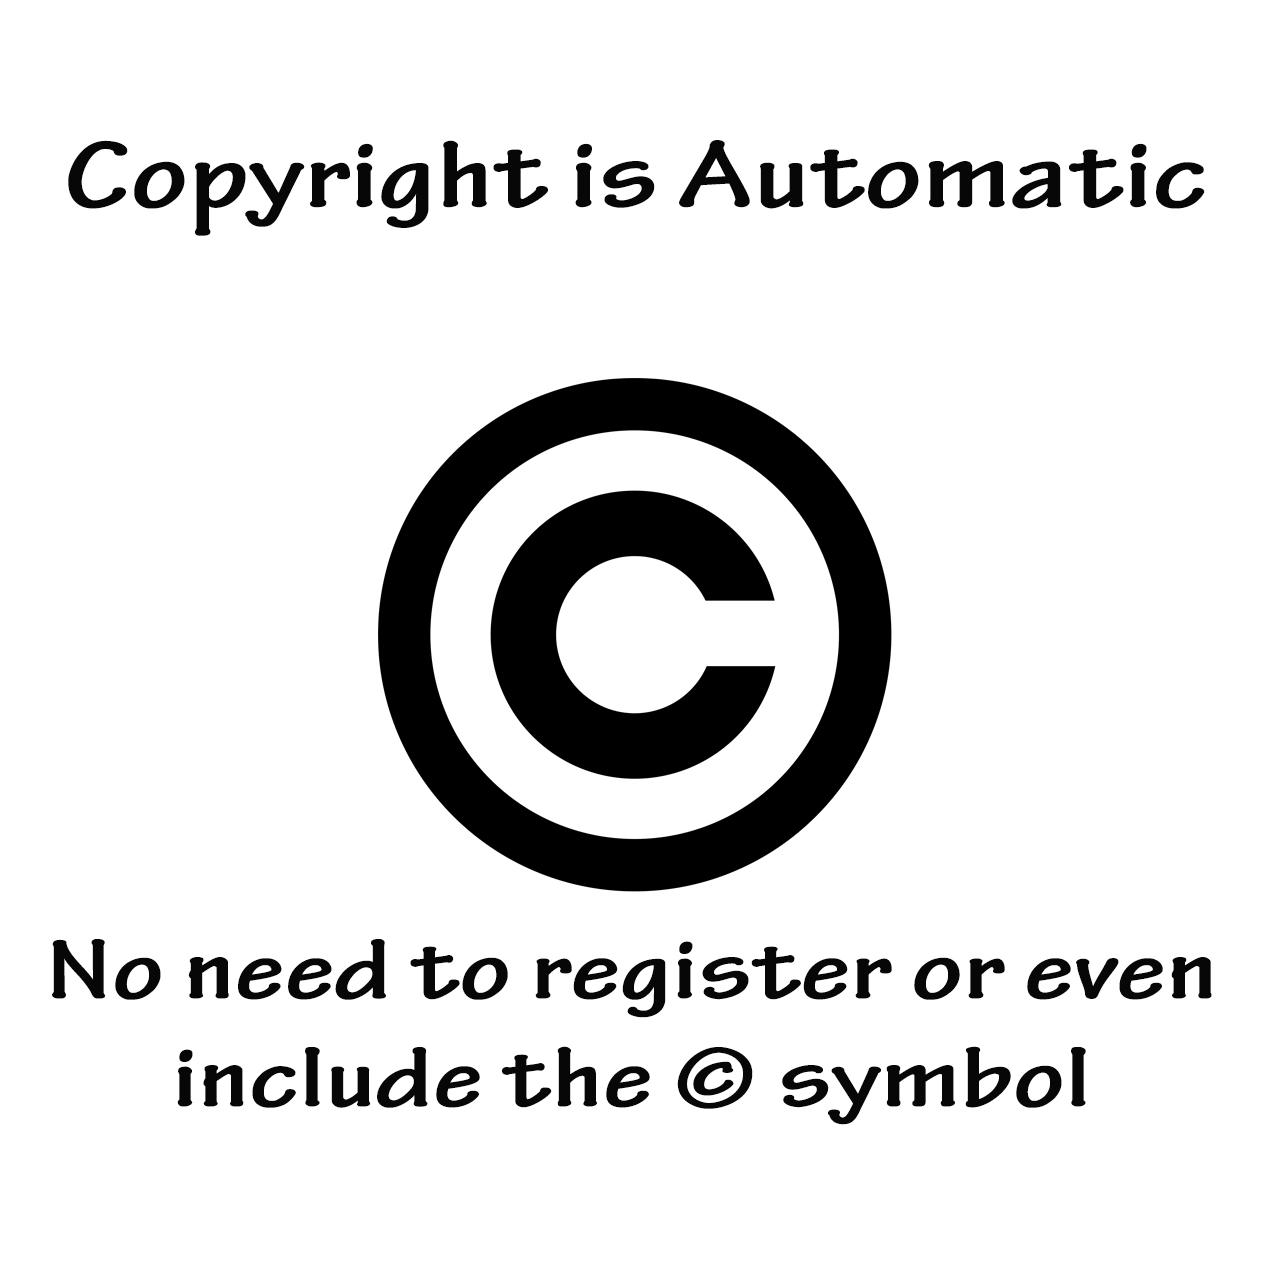 Copyright is Automatic, no need to register or include the copyright notice symbol